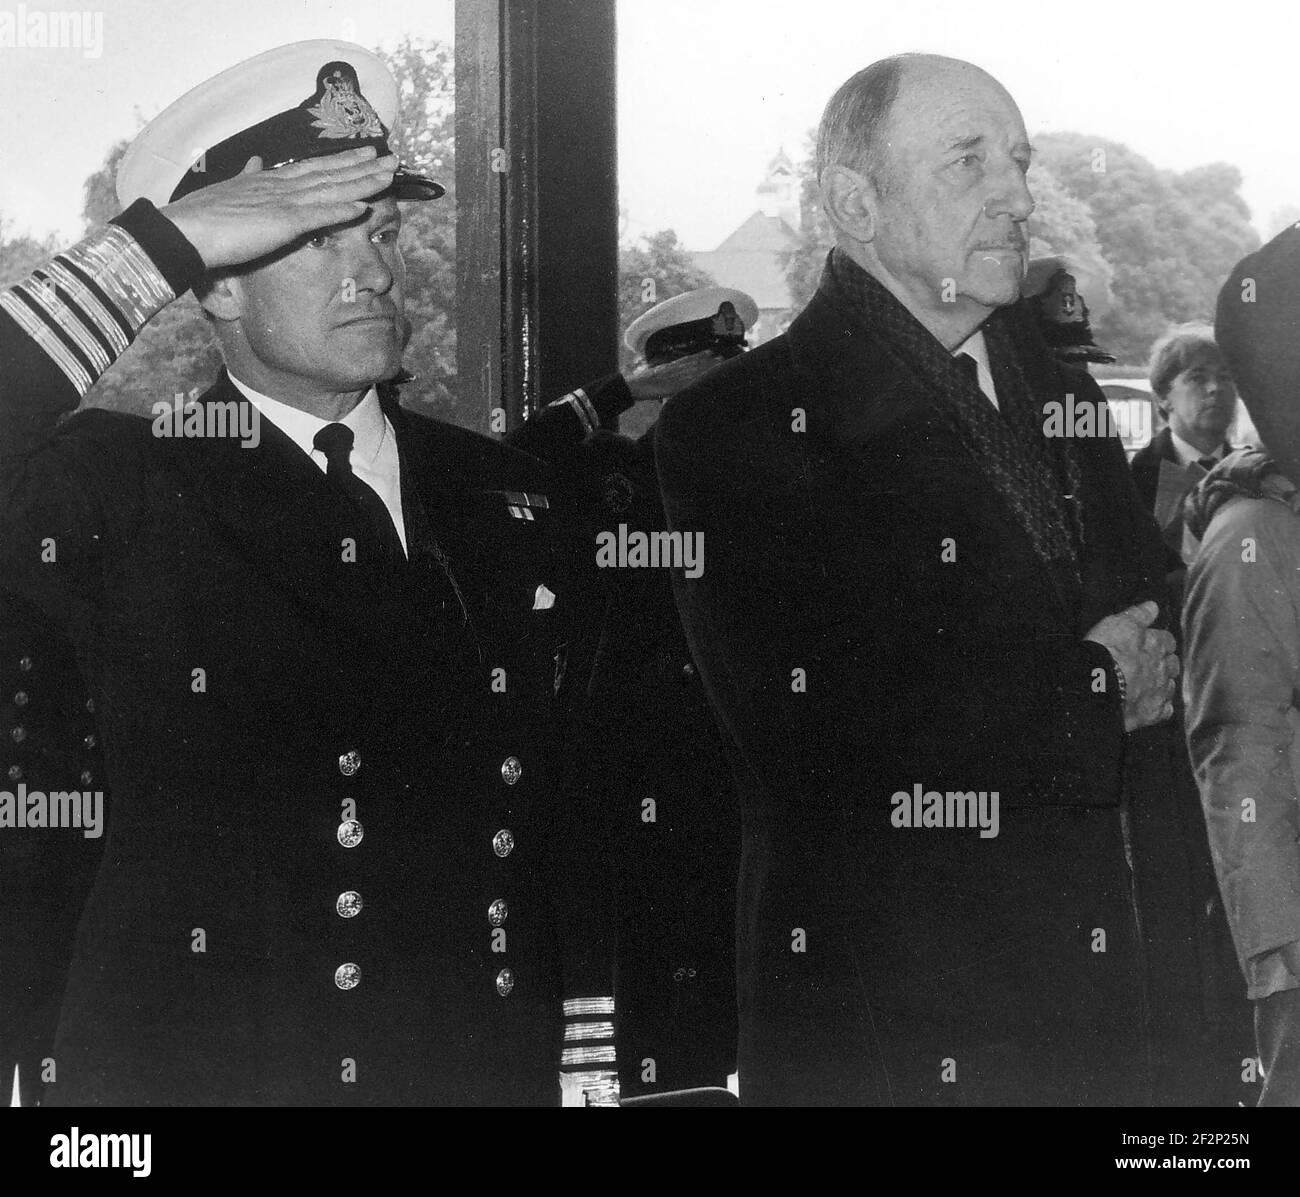 CHANGE OF COMMAND CEREMONY FOR NATO STANDING FORCE CHANNEL., DR. JOSEPH LUNS (SECRETARY GENERAL NATO)   AND COMMANDER R.C. MOORE ( NEW COMMANDER NATO STANDING FORCE CHANNEL. PIC MIKE WALKER,  1984. Stock Photo